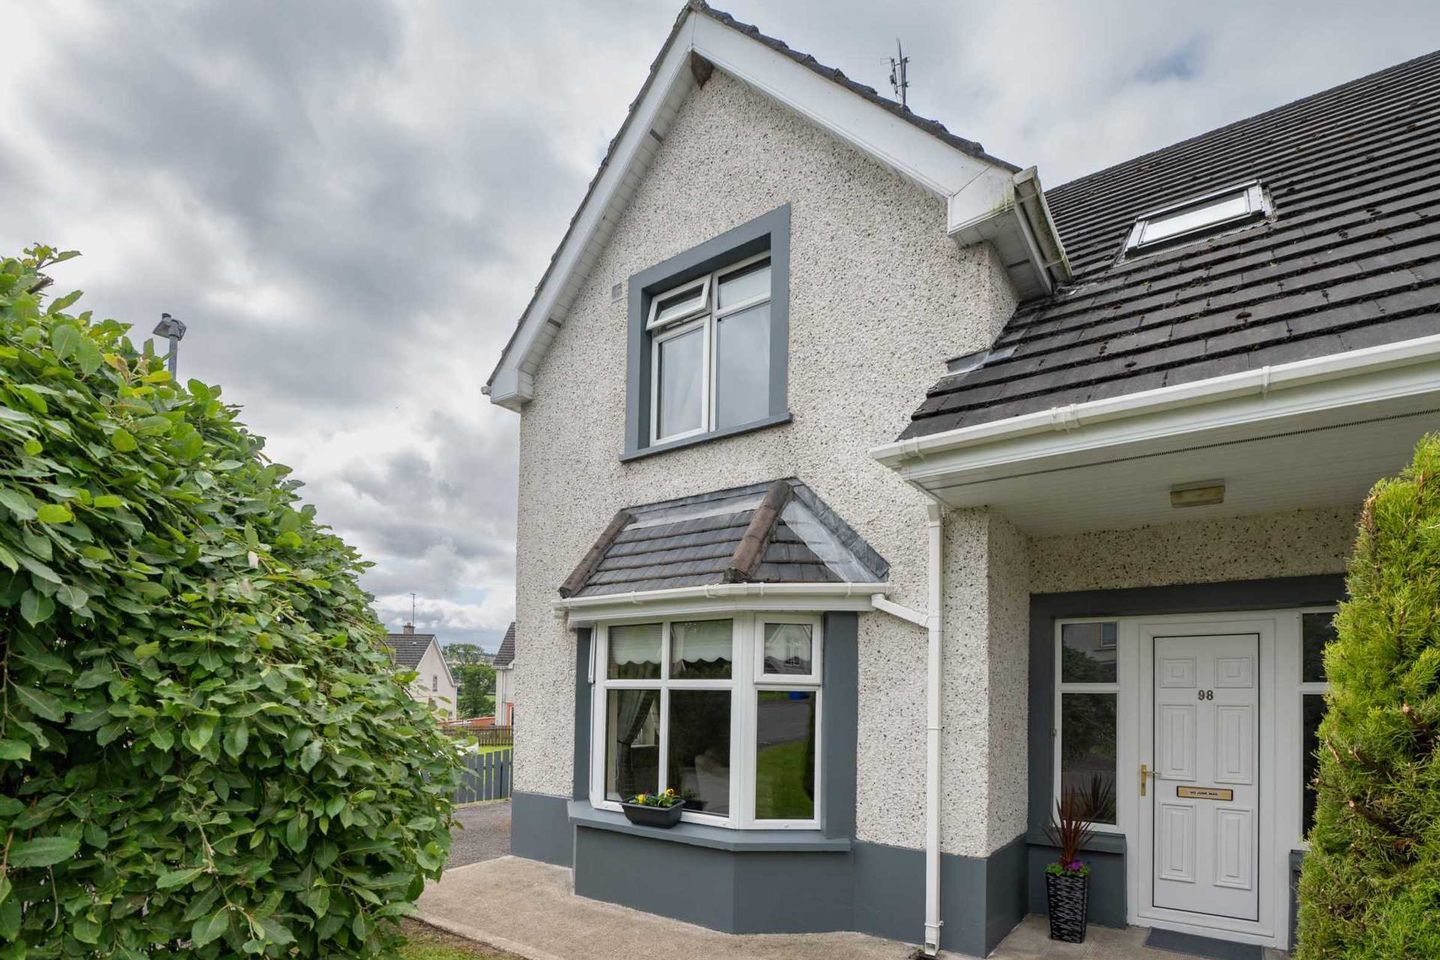 98 Ballymacool Wood, Letterkenny, Co. Donegal